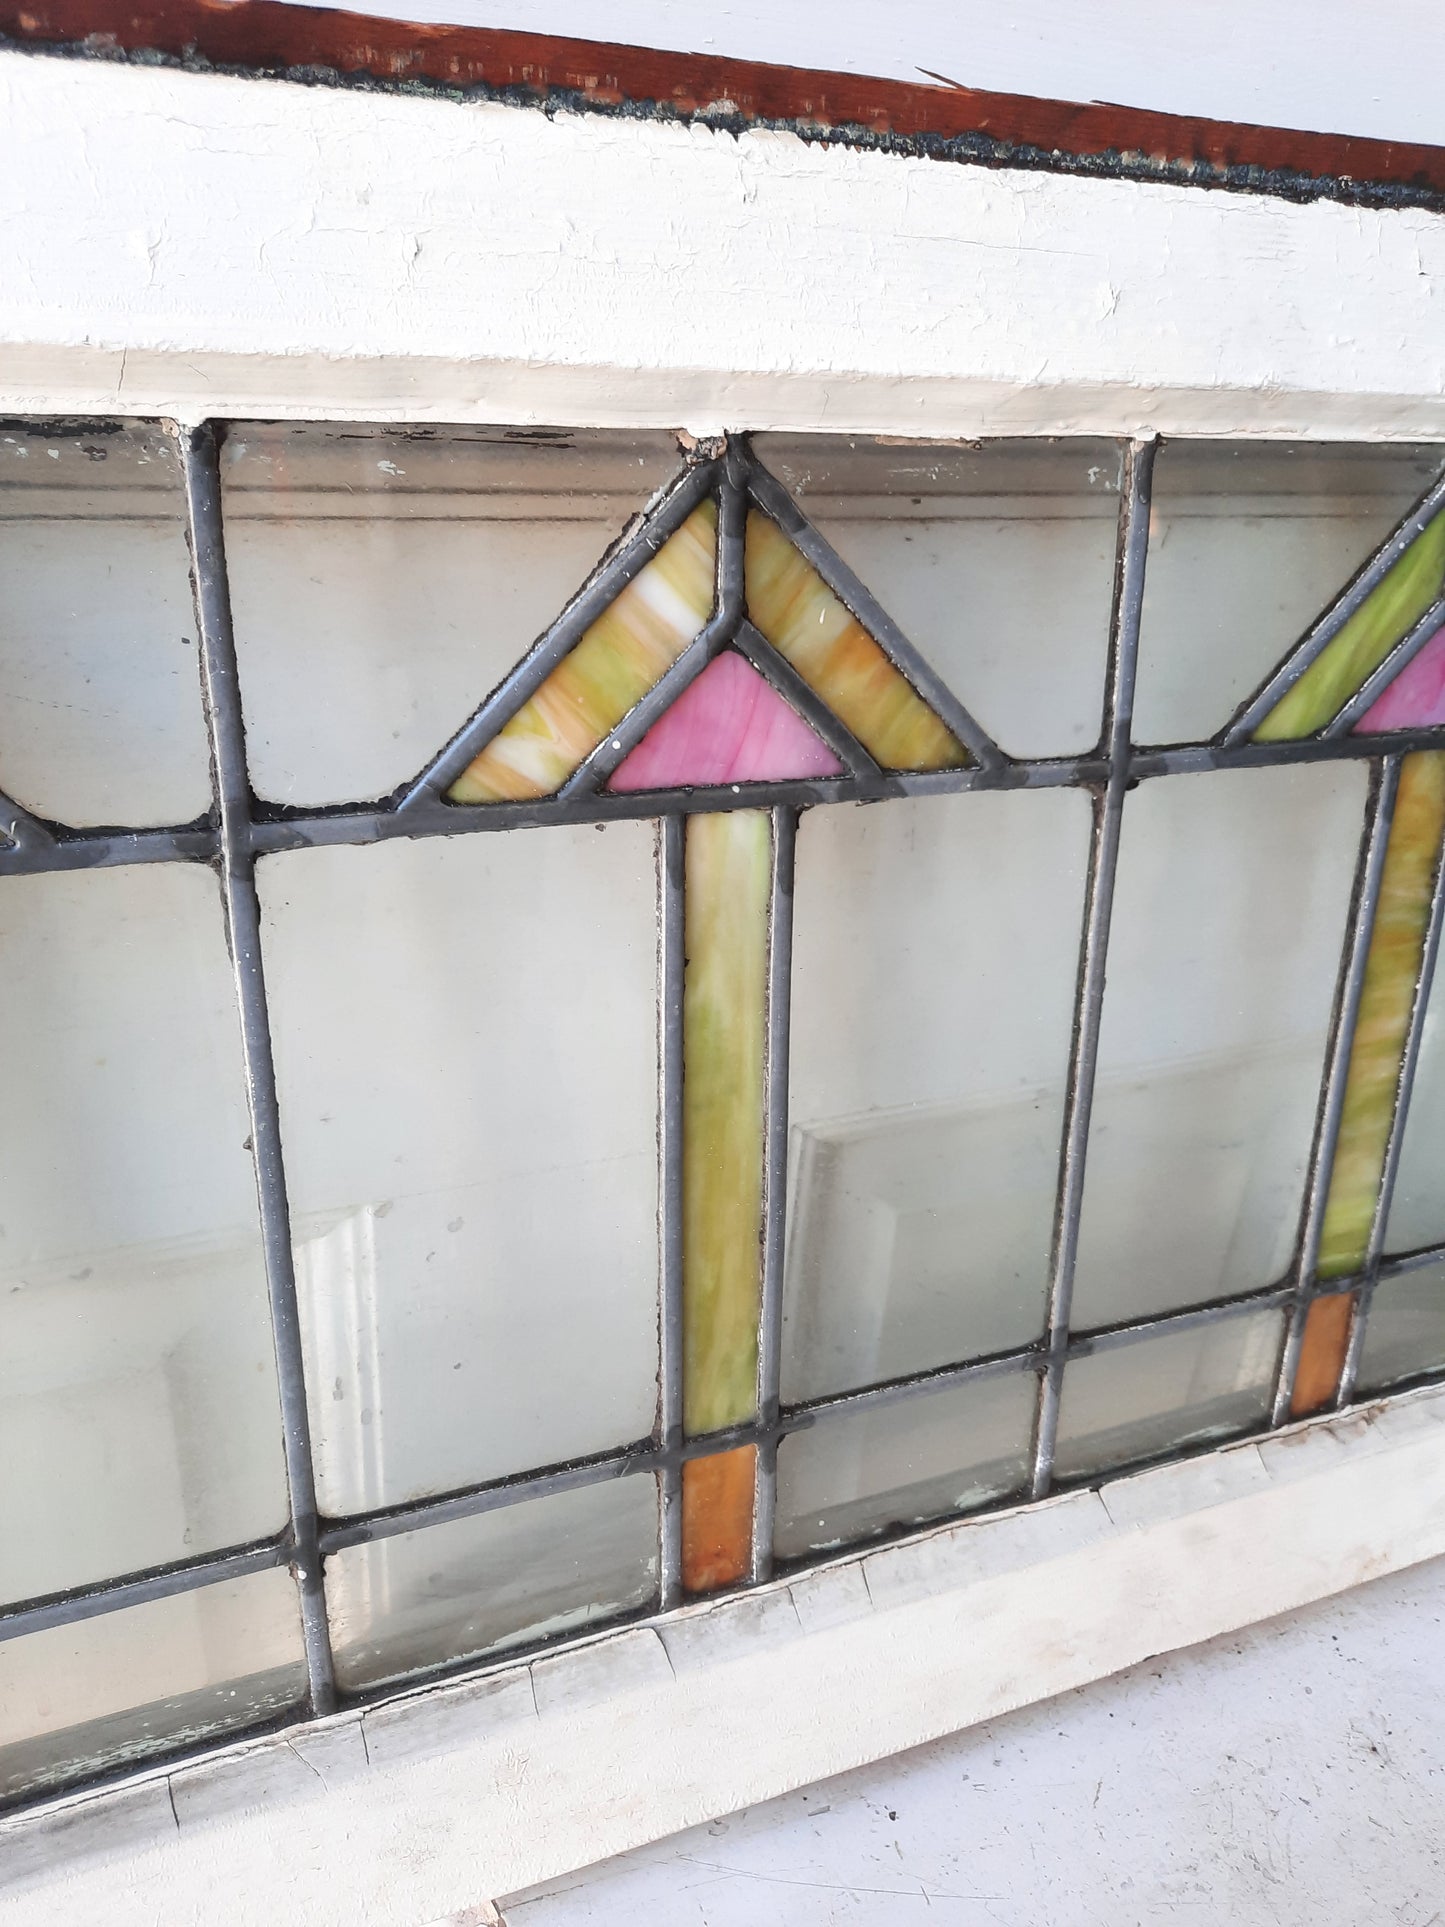 Arts and Crafts Style Stained Glass Window with Pink and Yellow Arrow Design